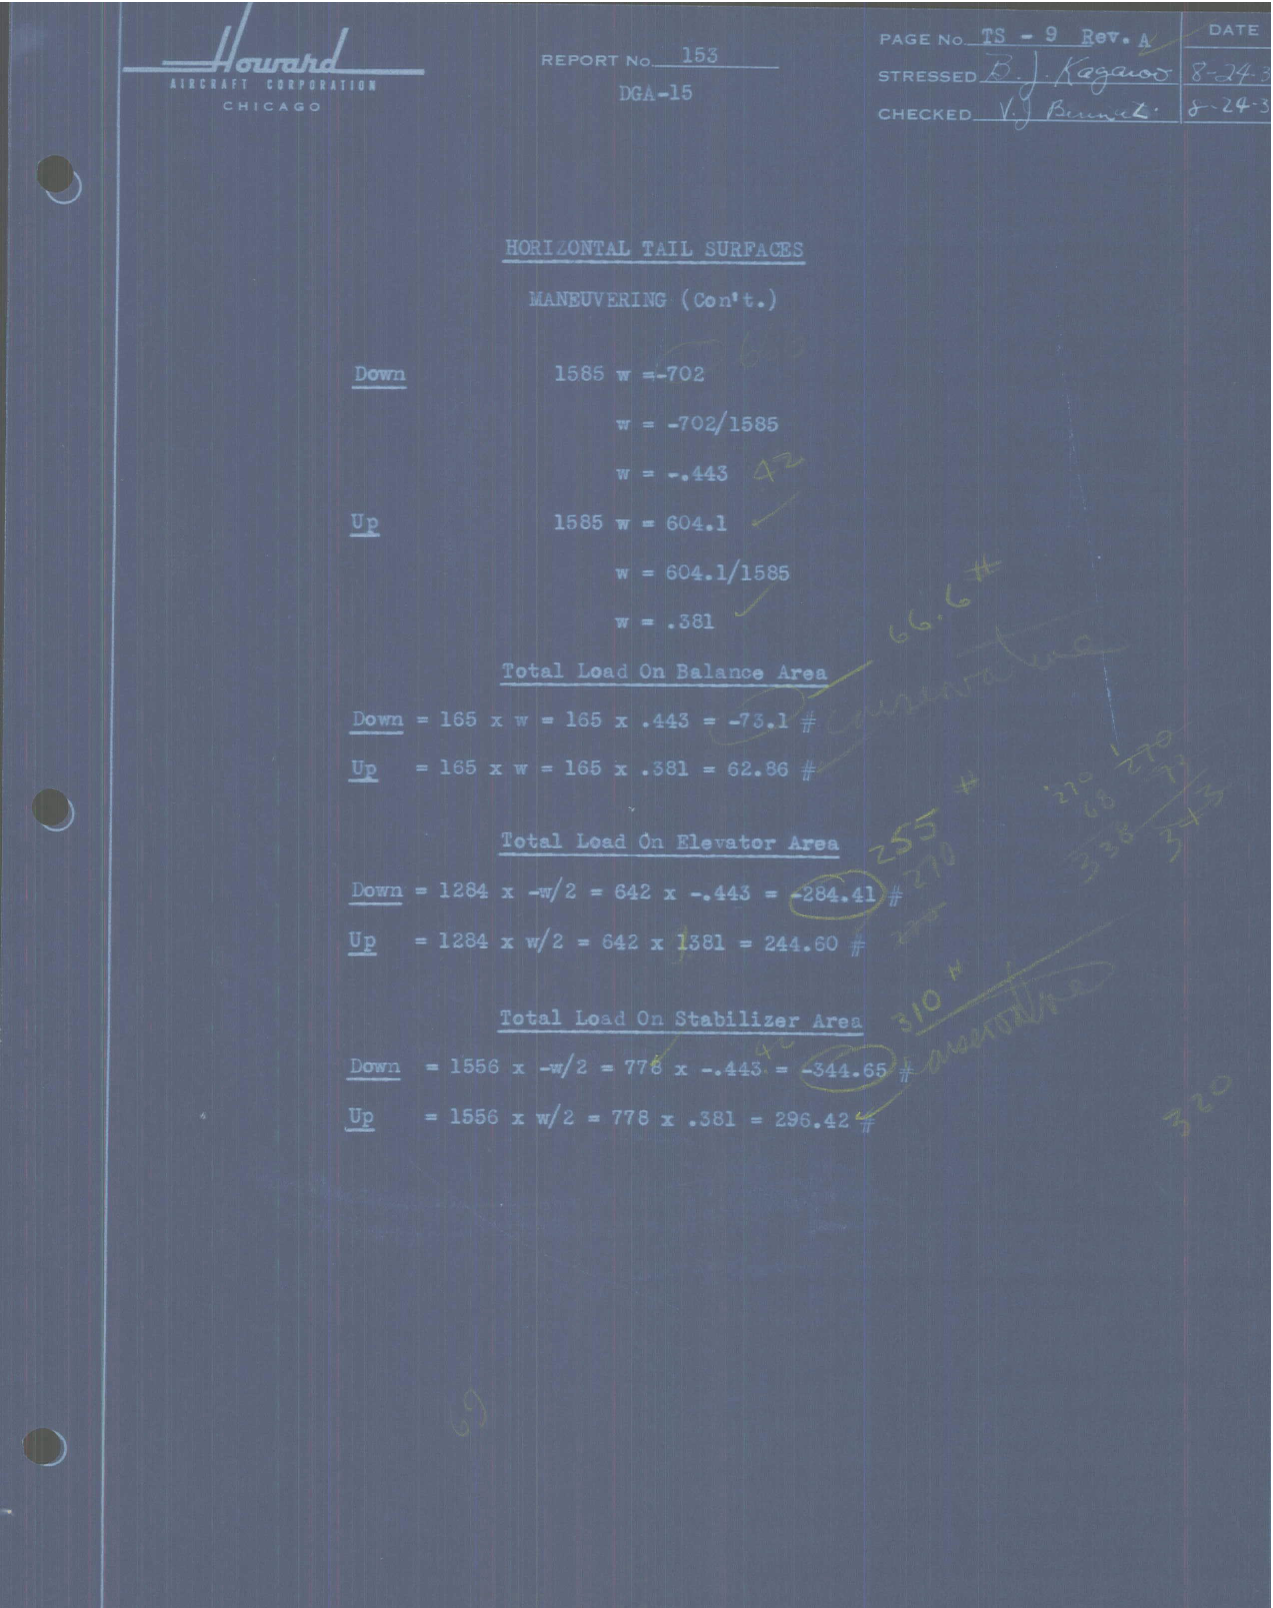 Sample page 32 from AirCorps Library document: Report 153, Horizontal Tail Surfaces, DGA-15